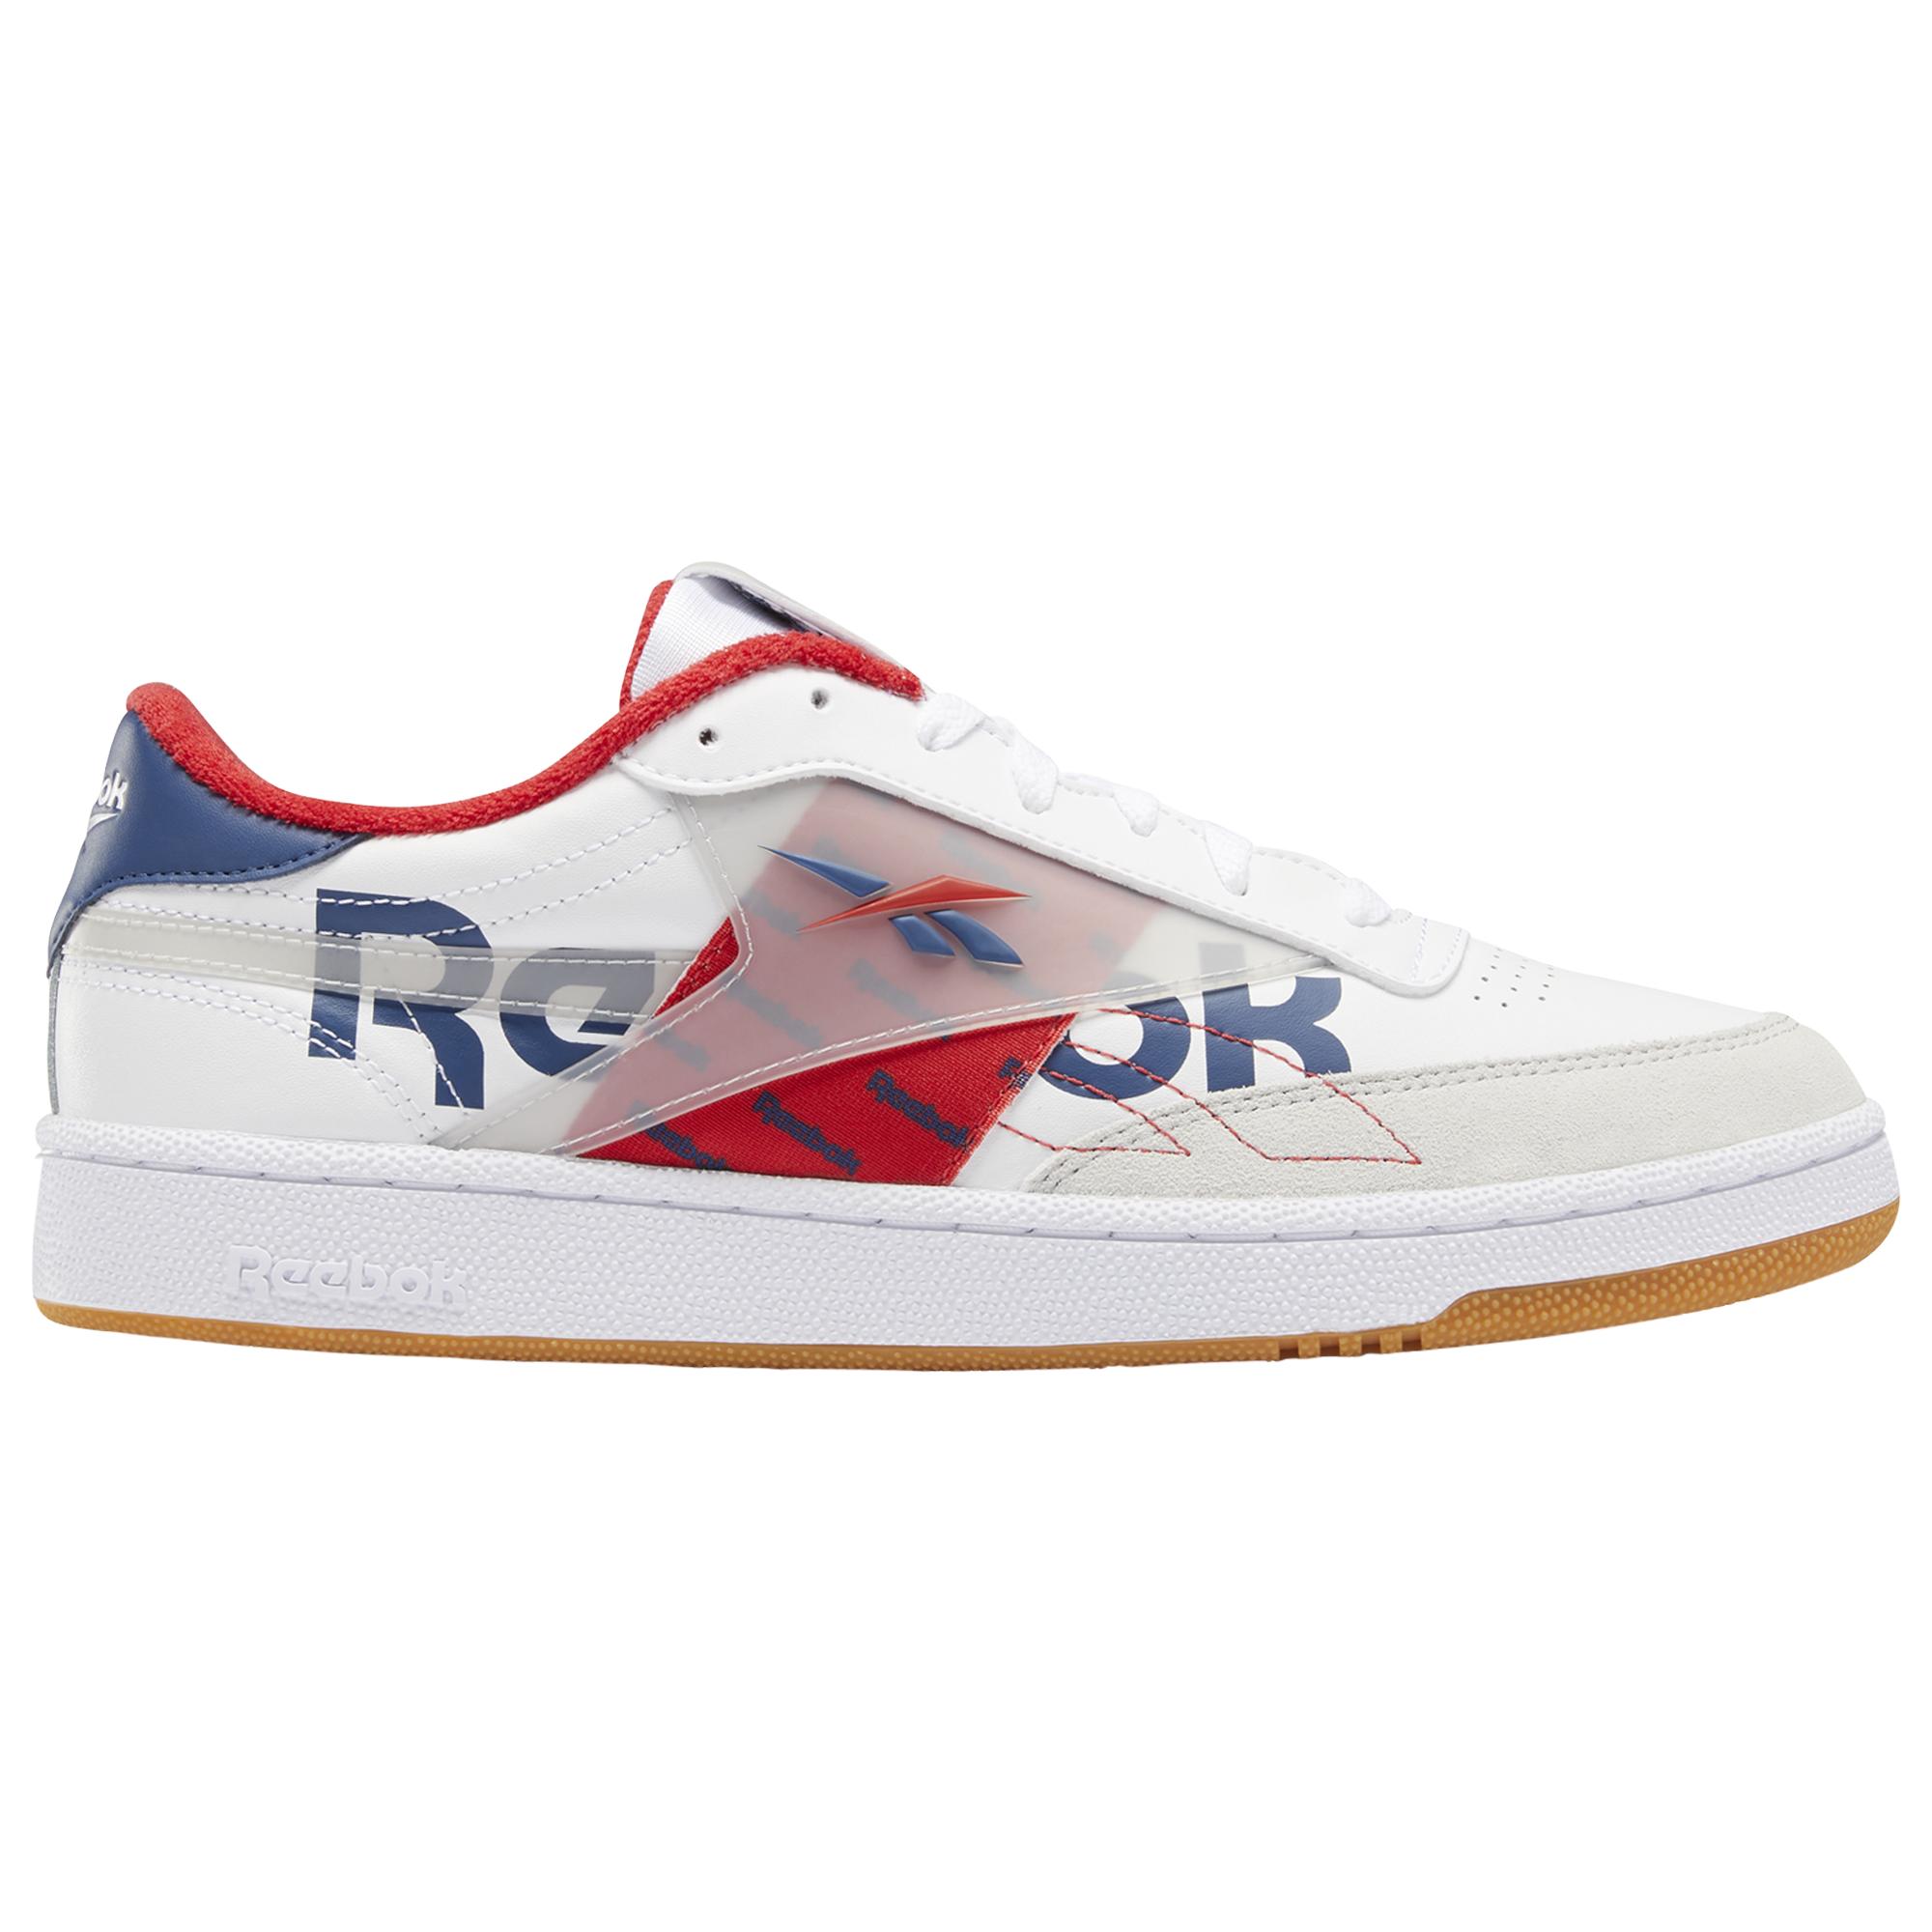 Reebok Synthetic Club C Ati - Shoes for Men - Lyst